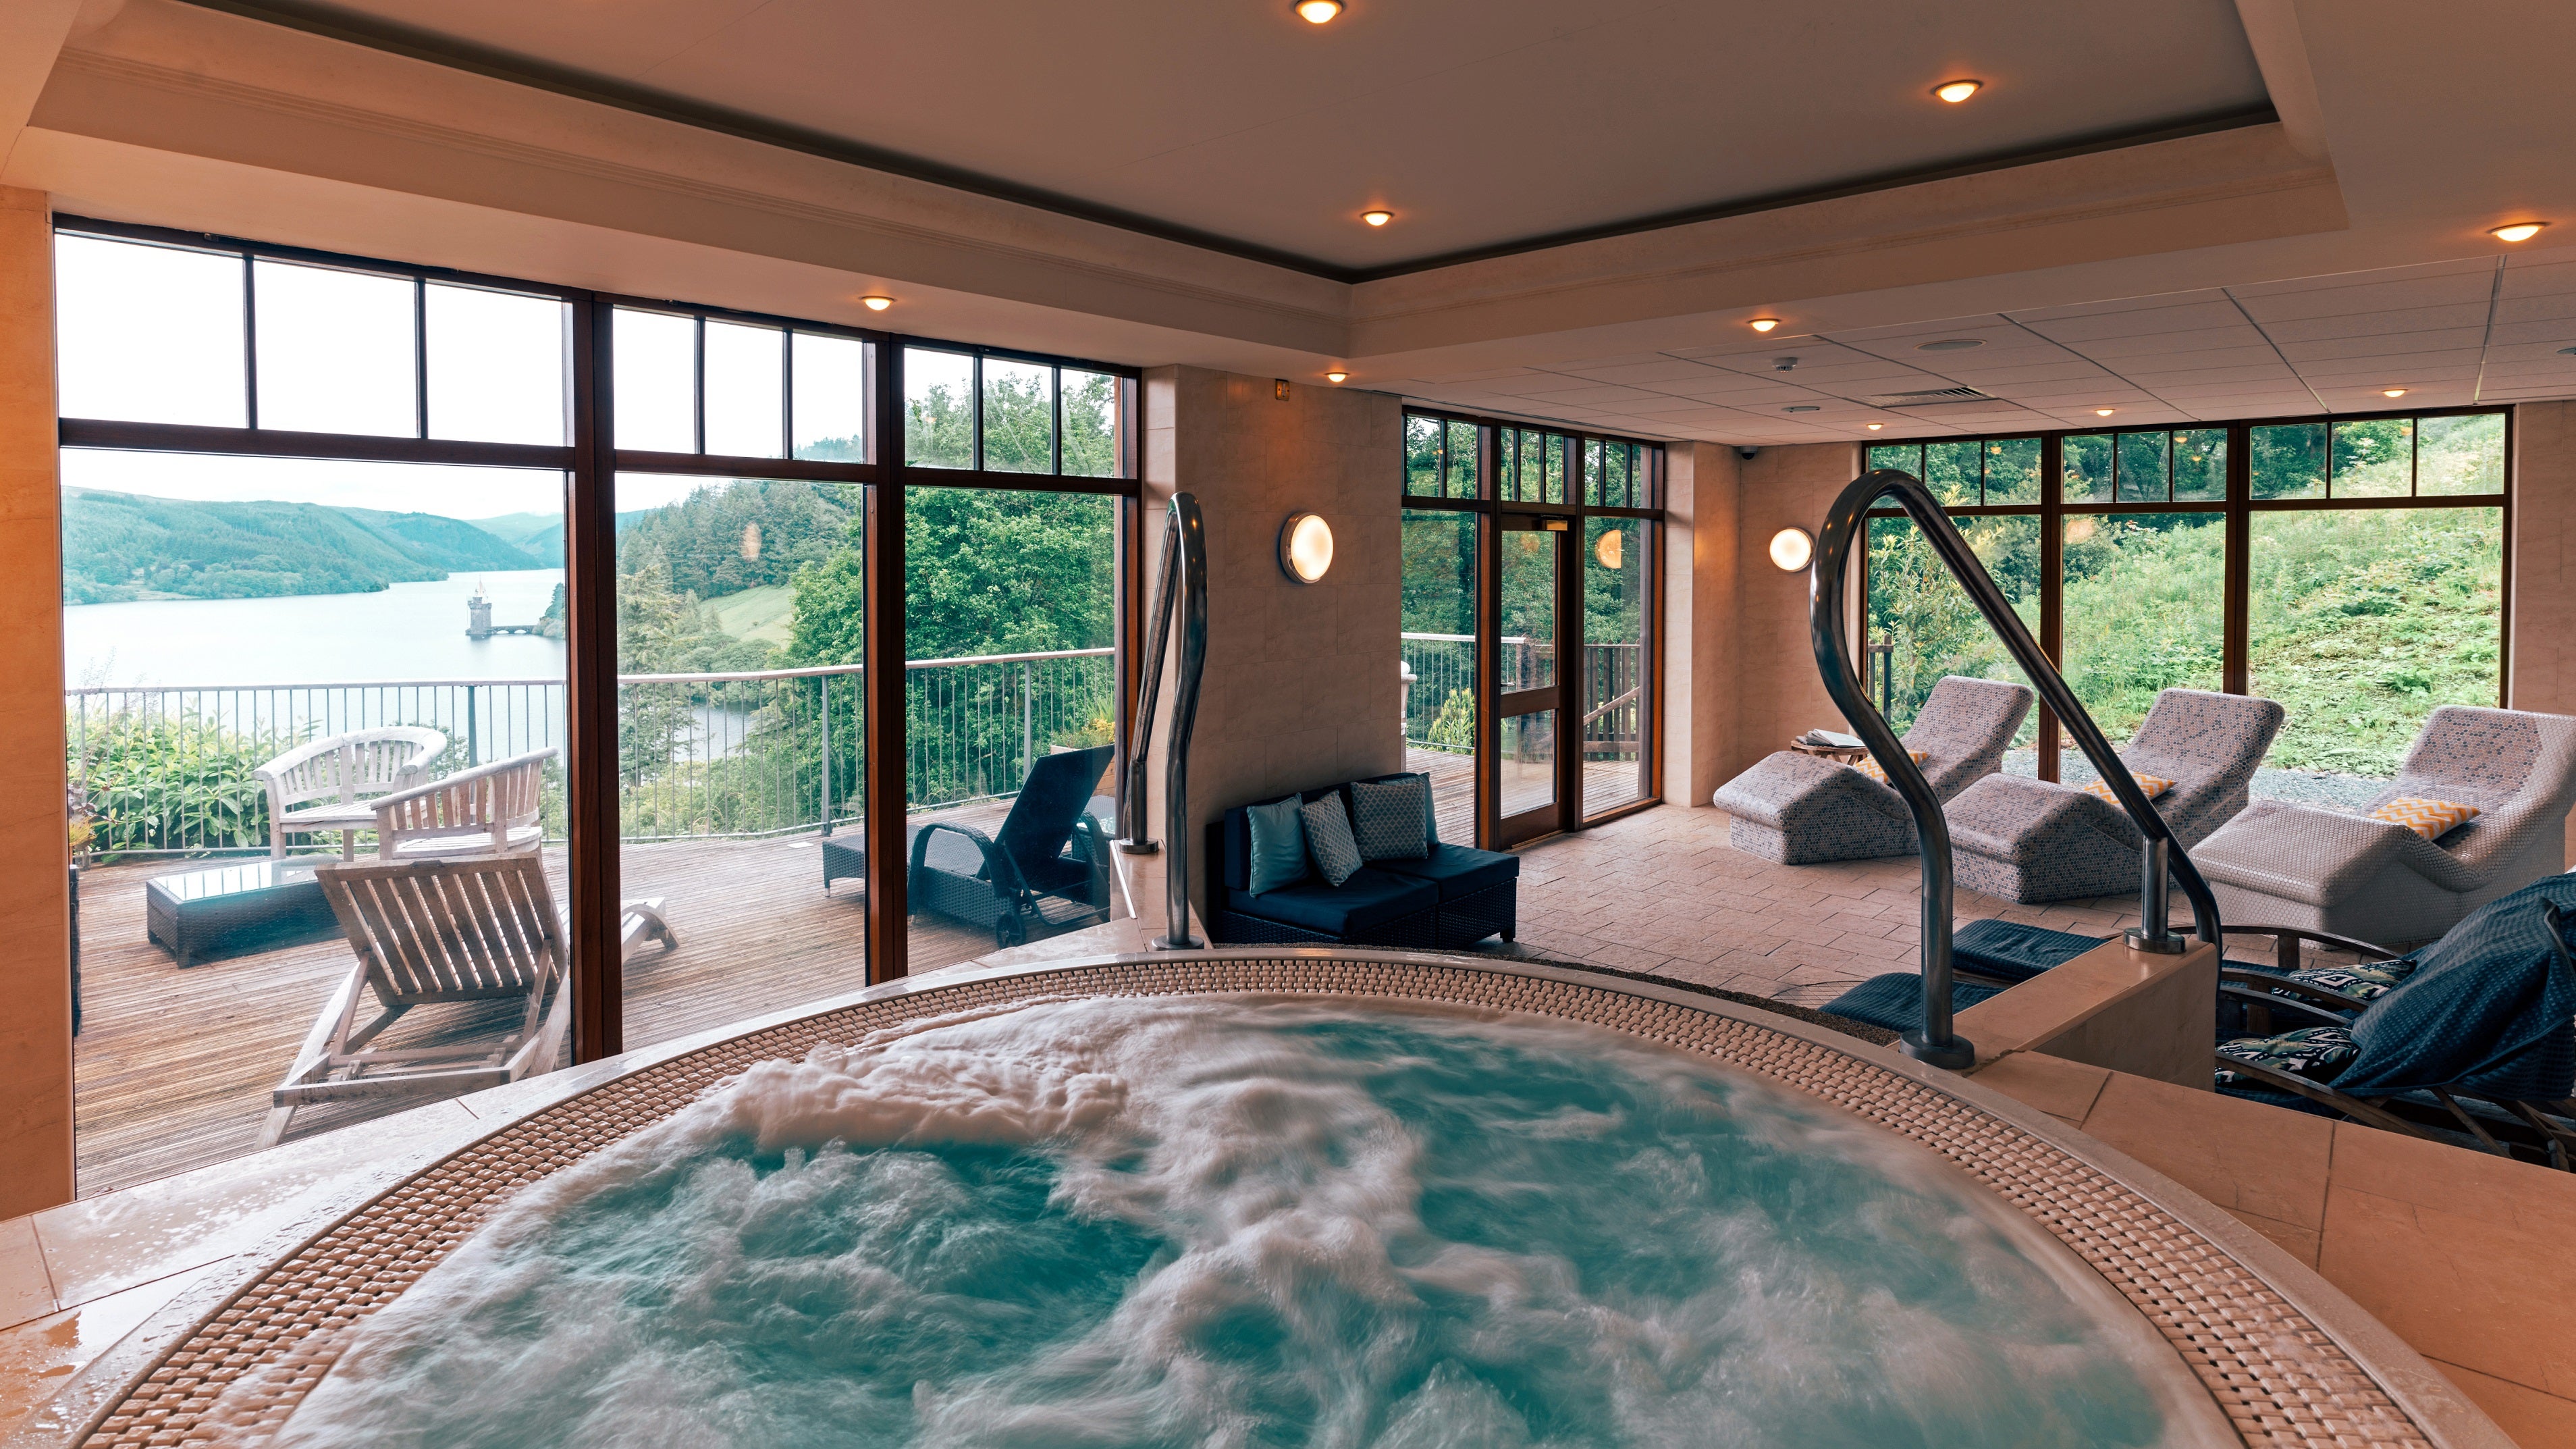 Pitch up in a hot tub and watch the world go by at Lake Vyrnwy